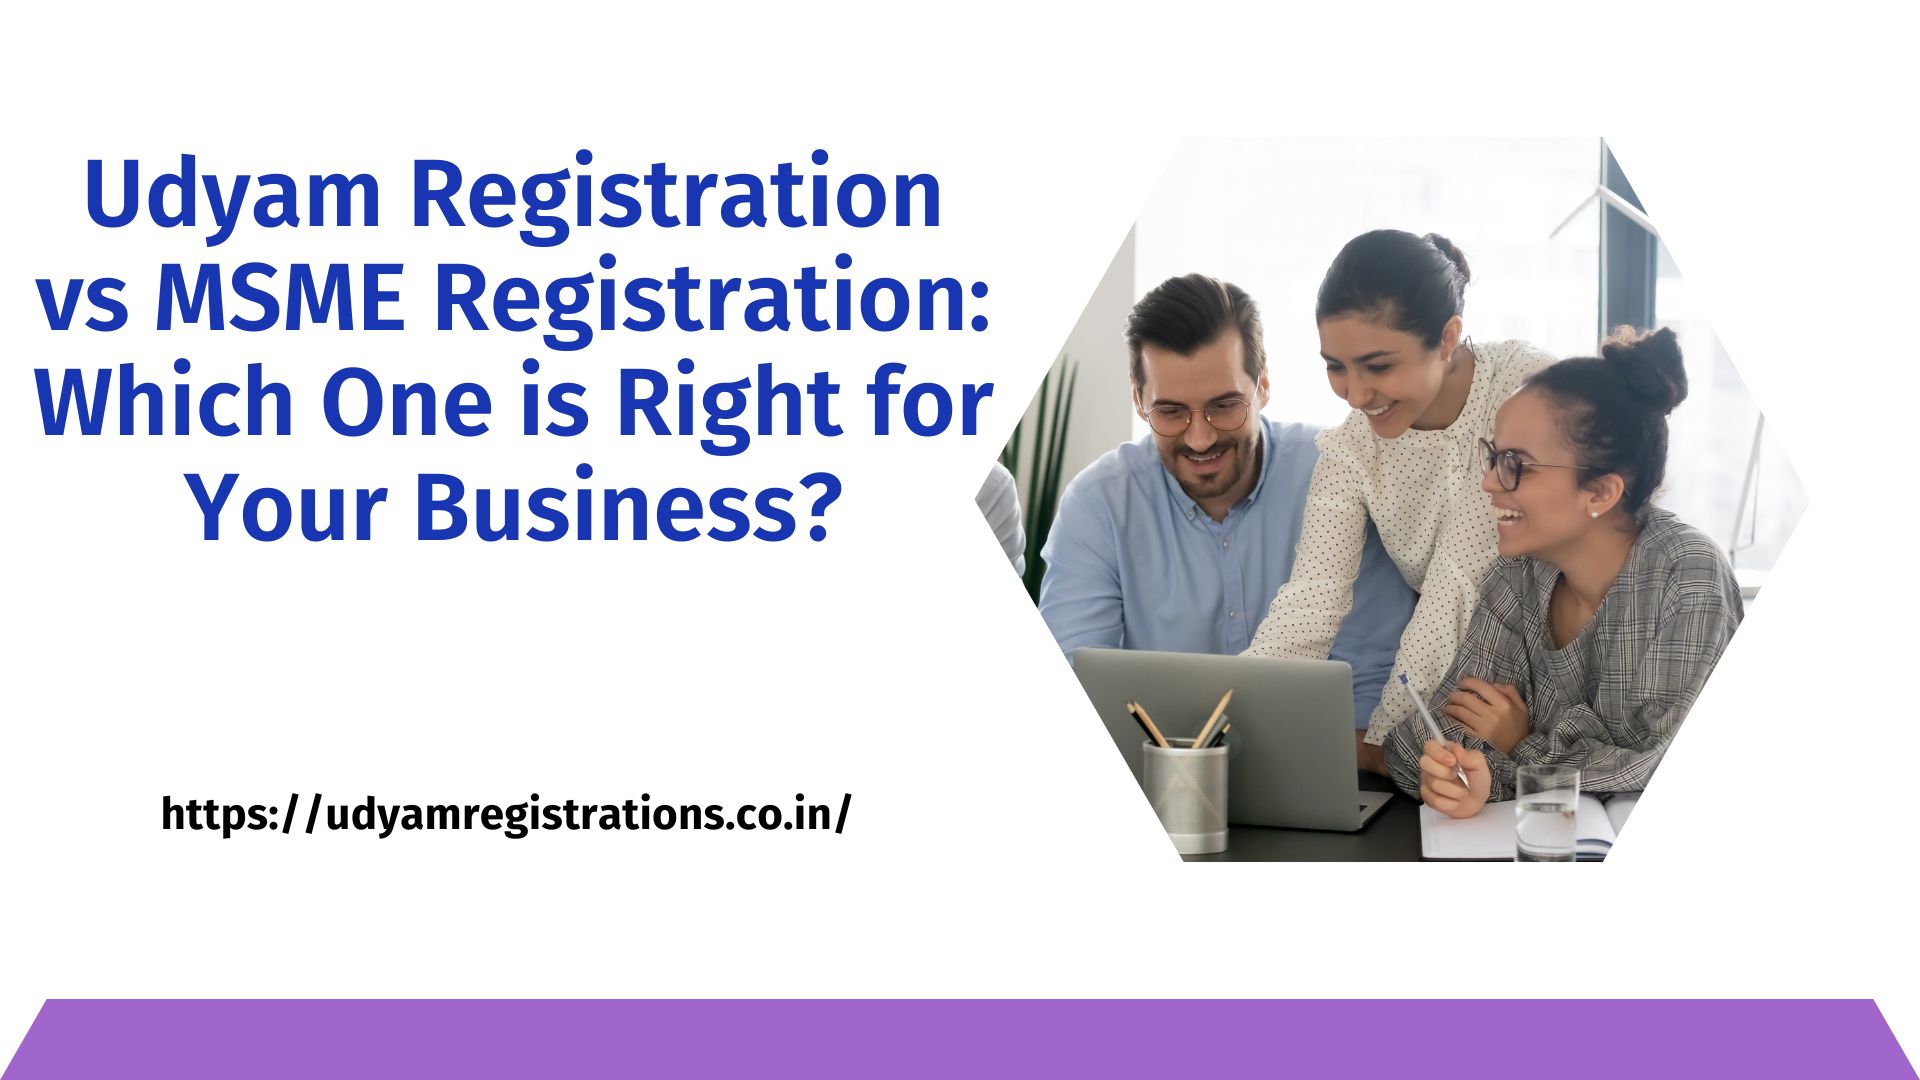 Udyam Registration vs MSME Registration: Which One is Right for Your Business?